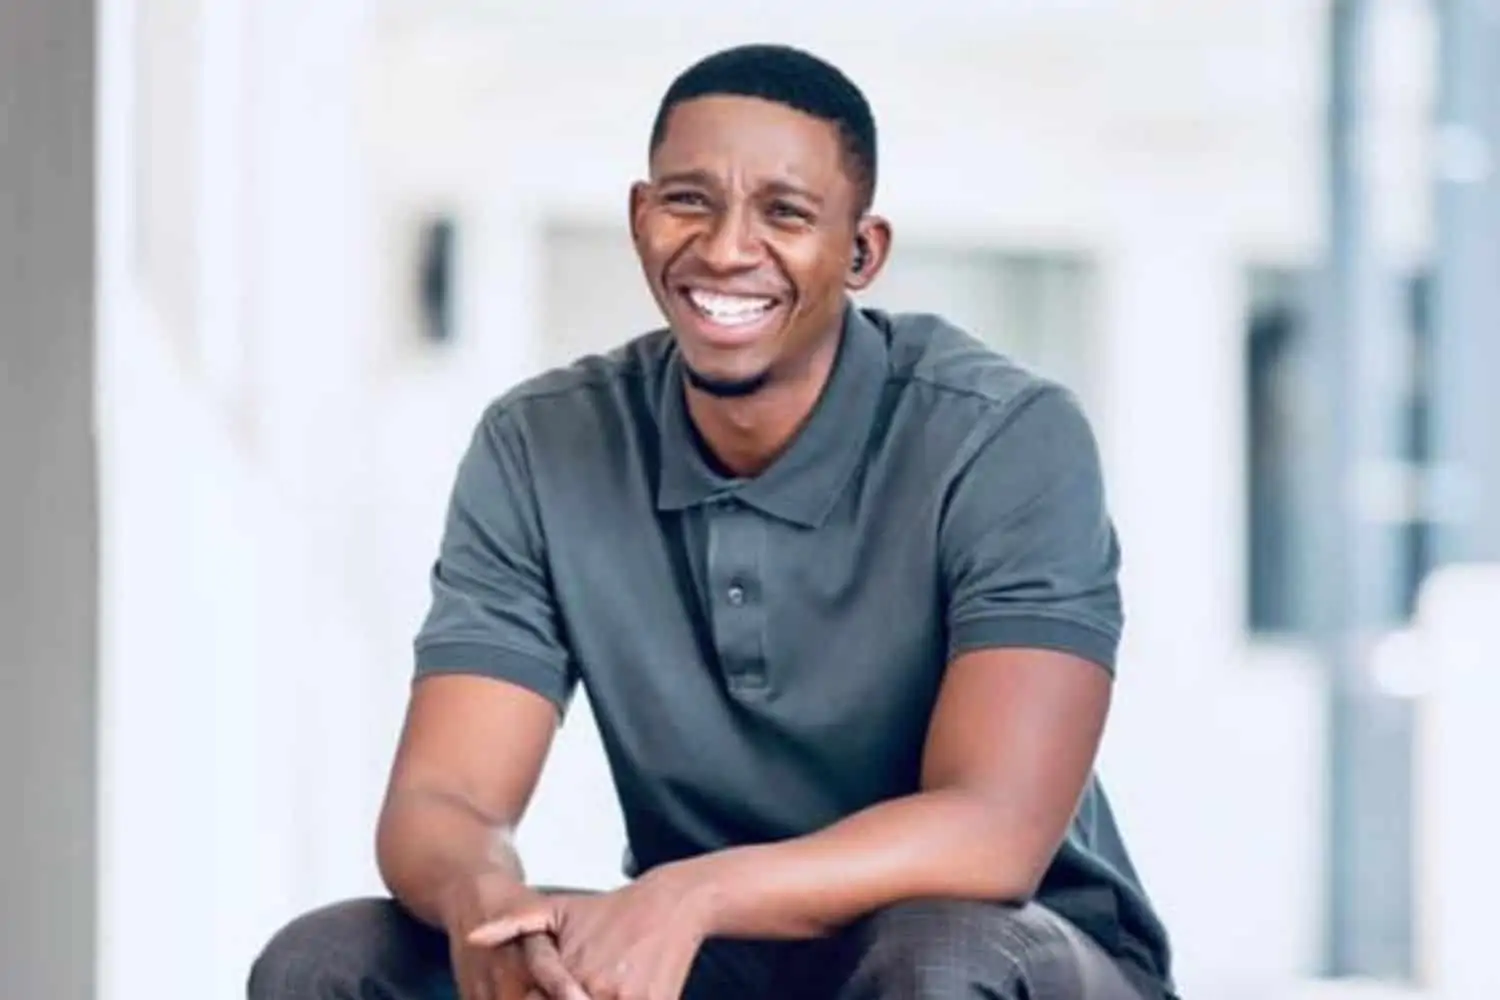 "Big Brother Mzansi" welcomes Lawrence Maleka as new host